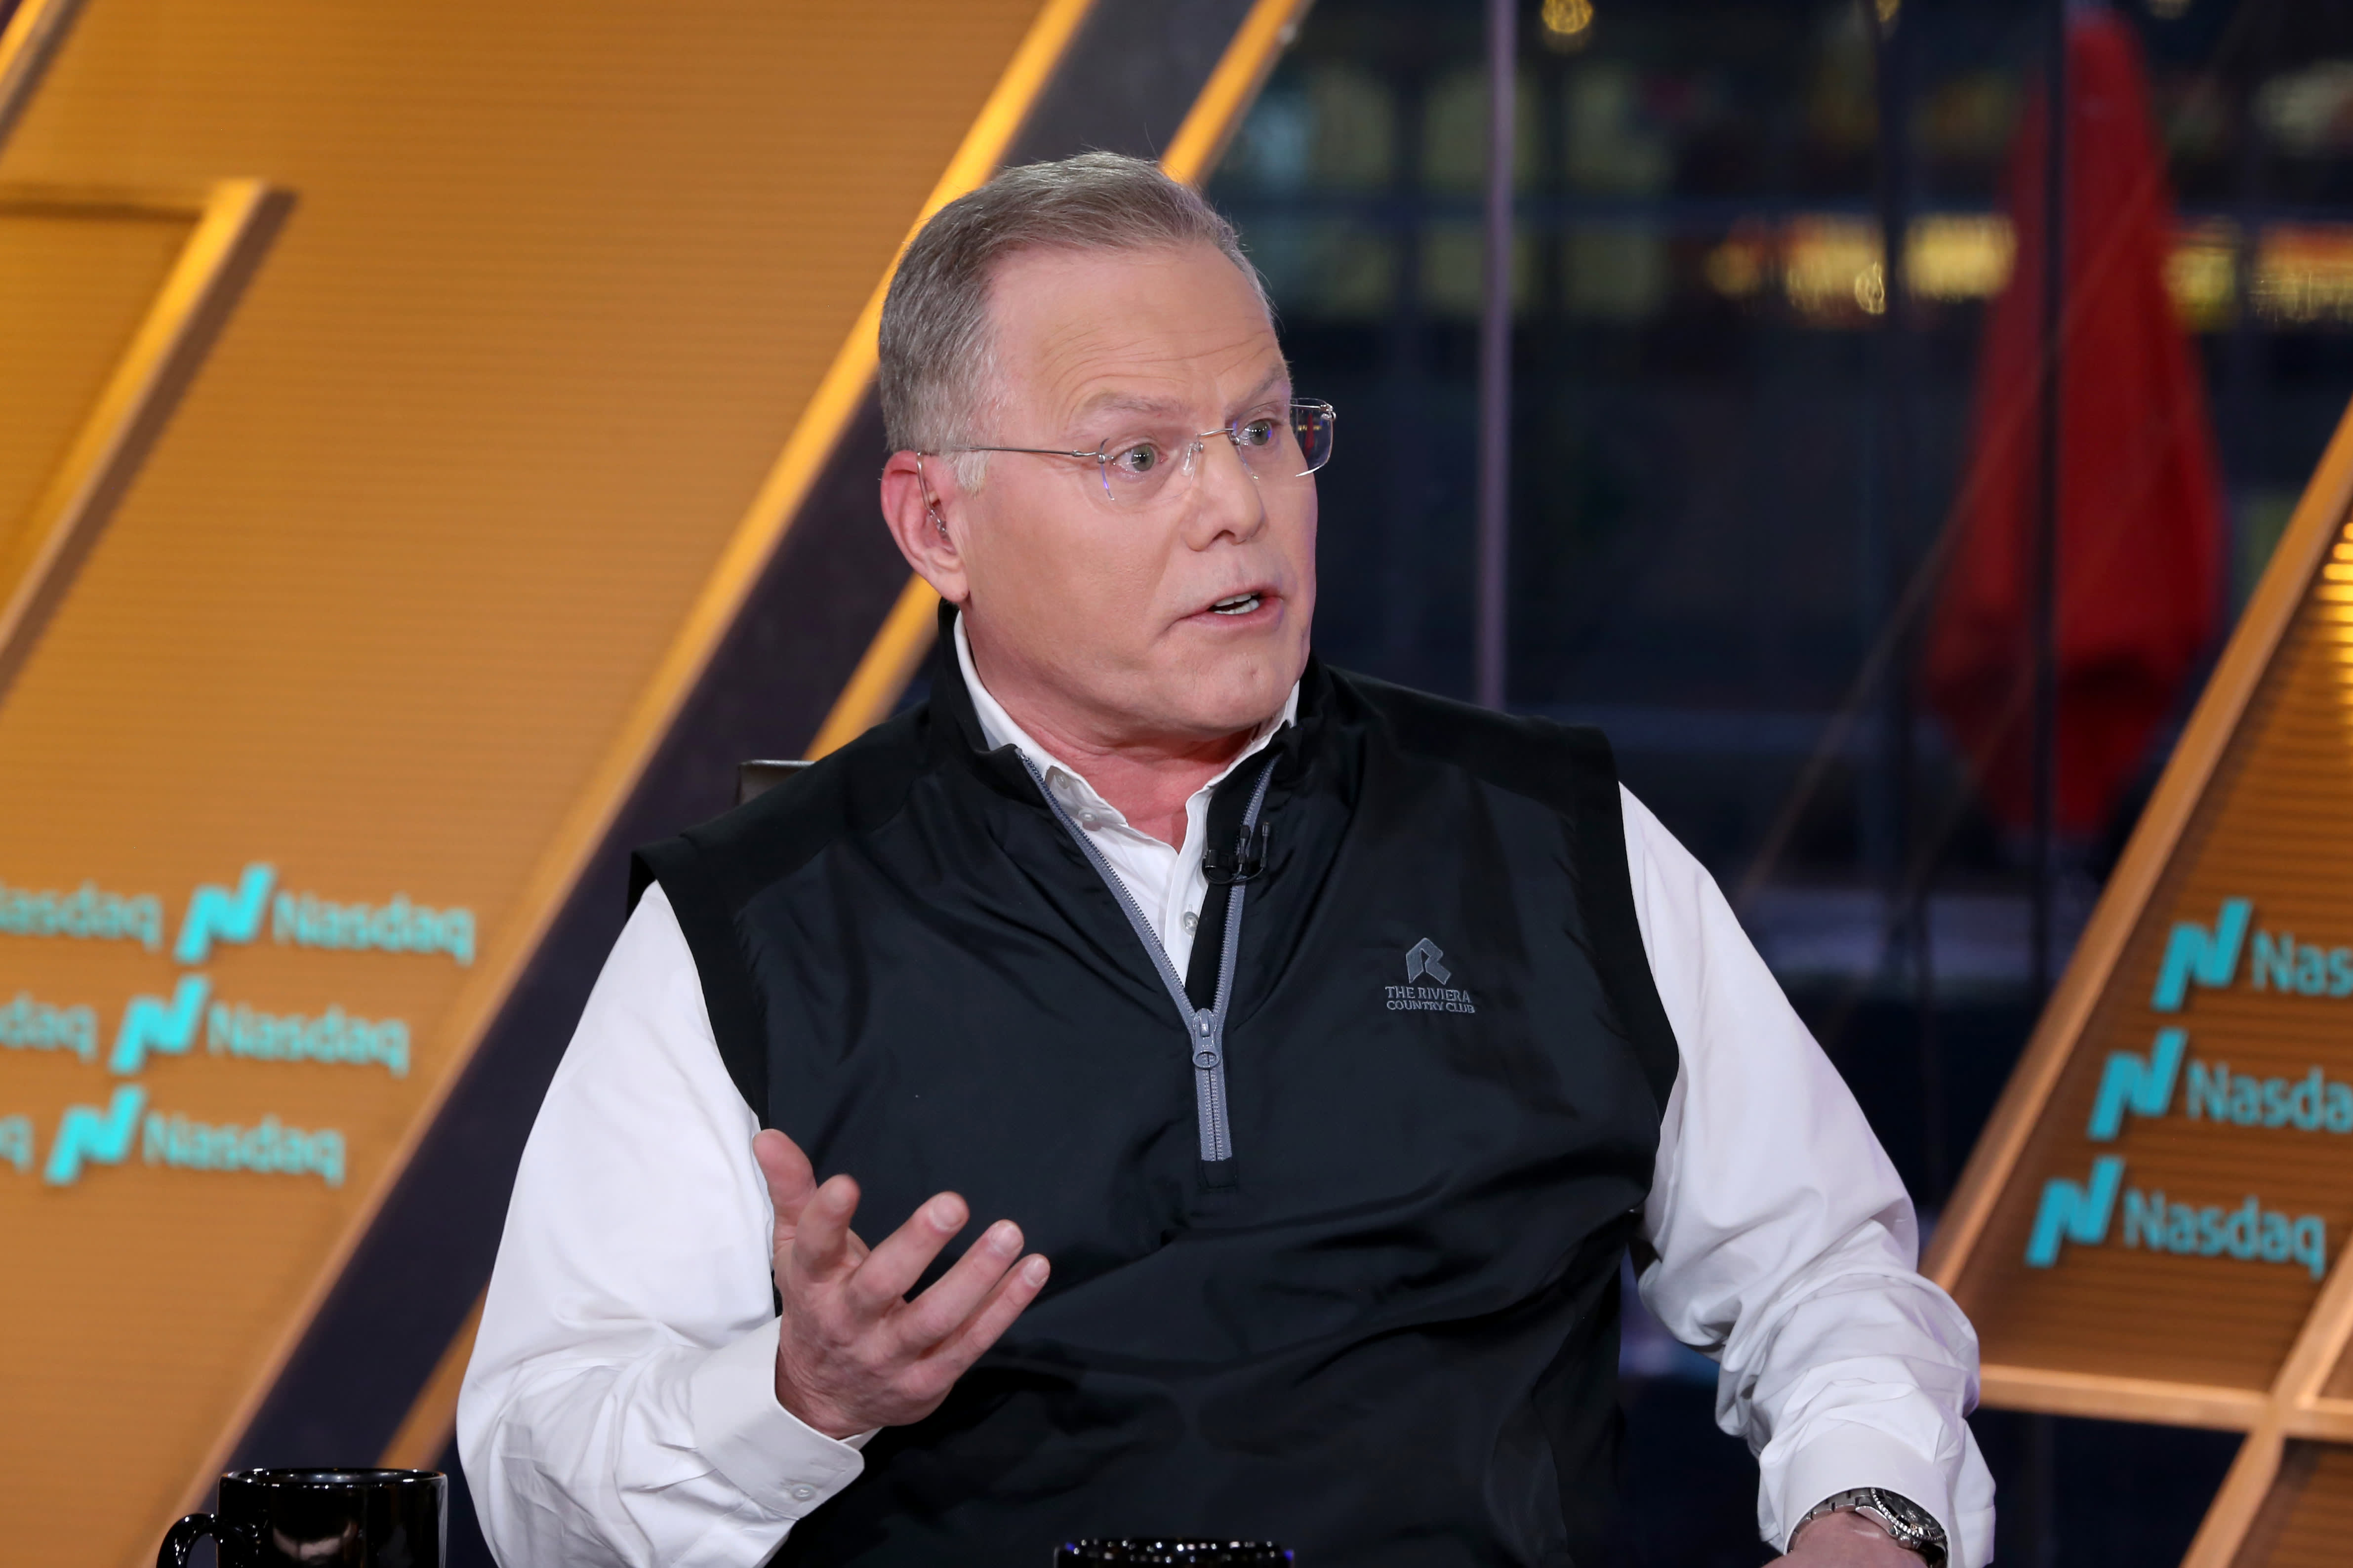 Watch CNBC's full interview with Discovery CEO David Zaslav